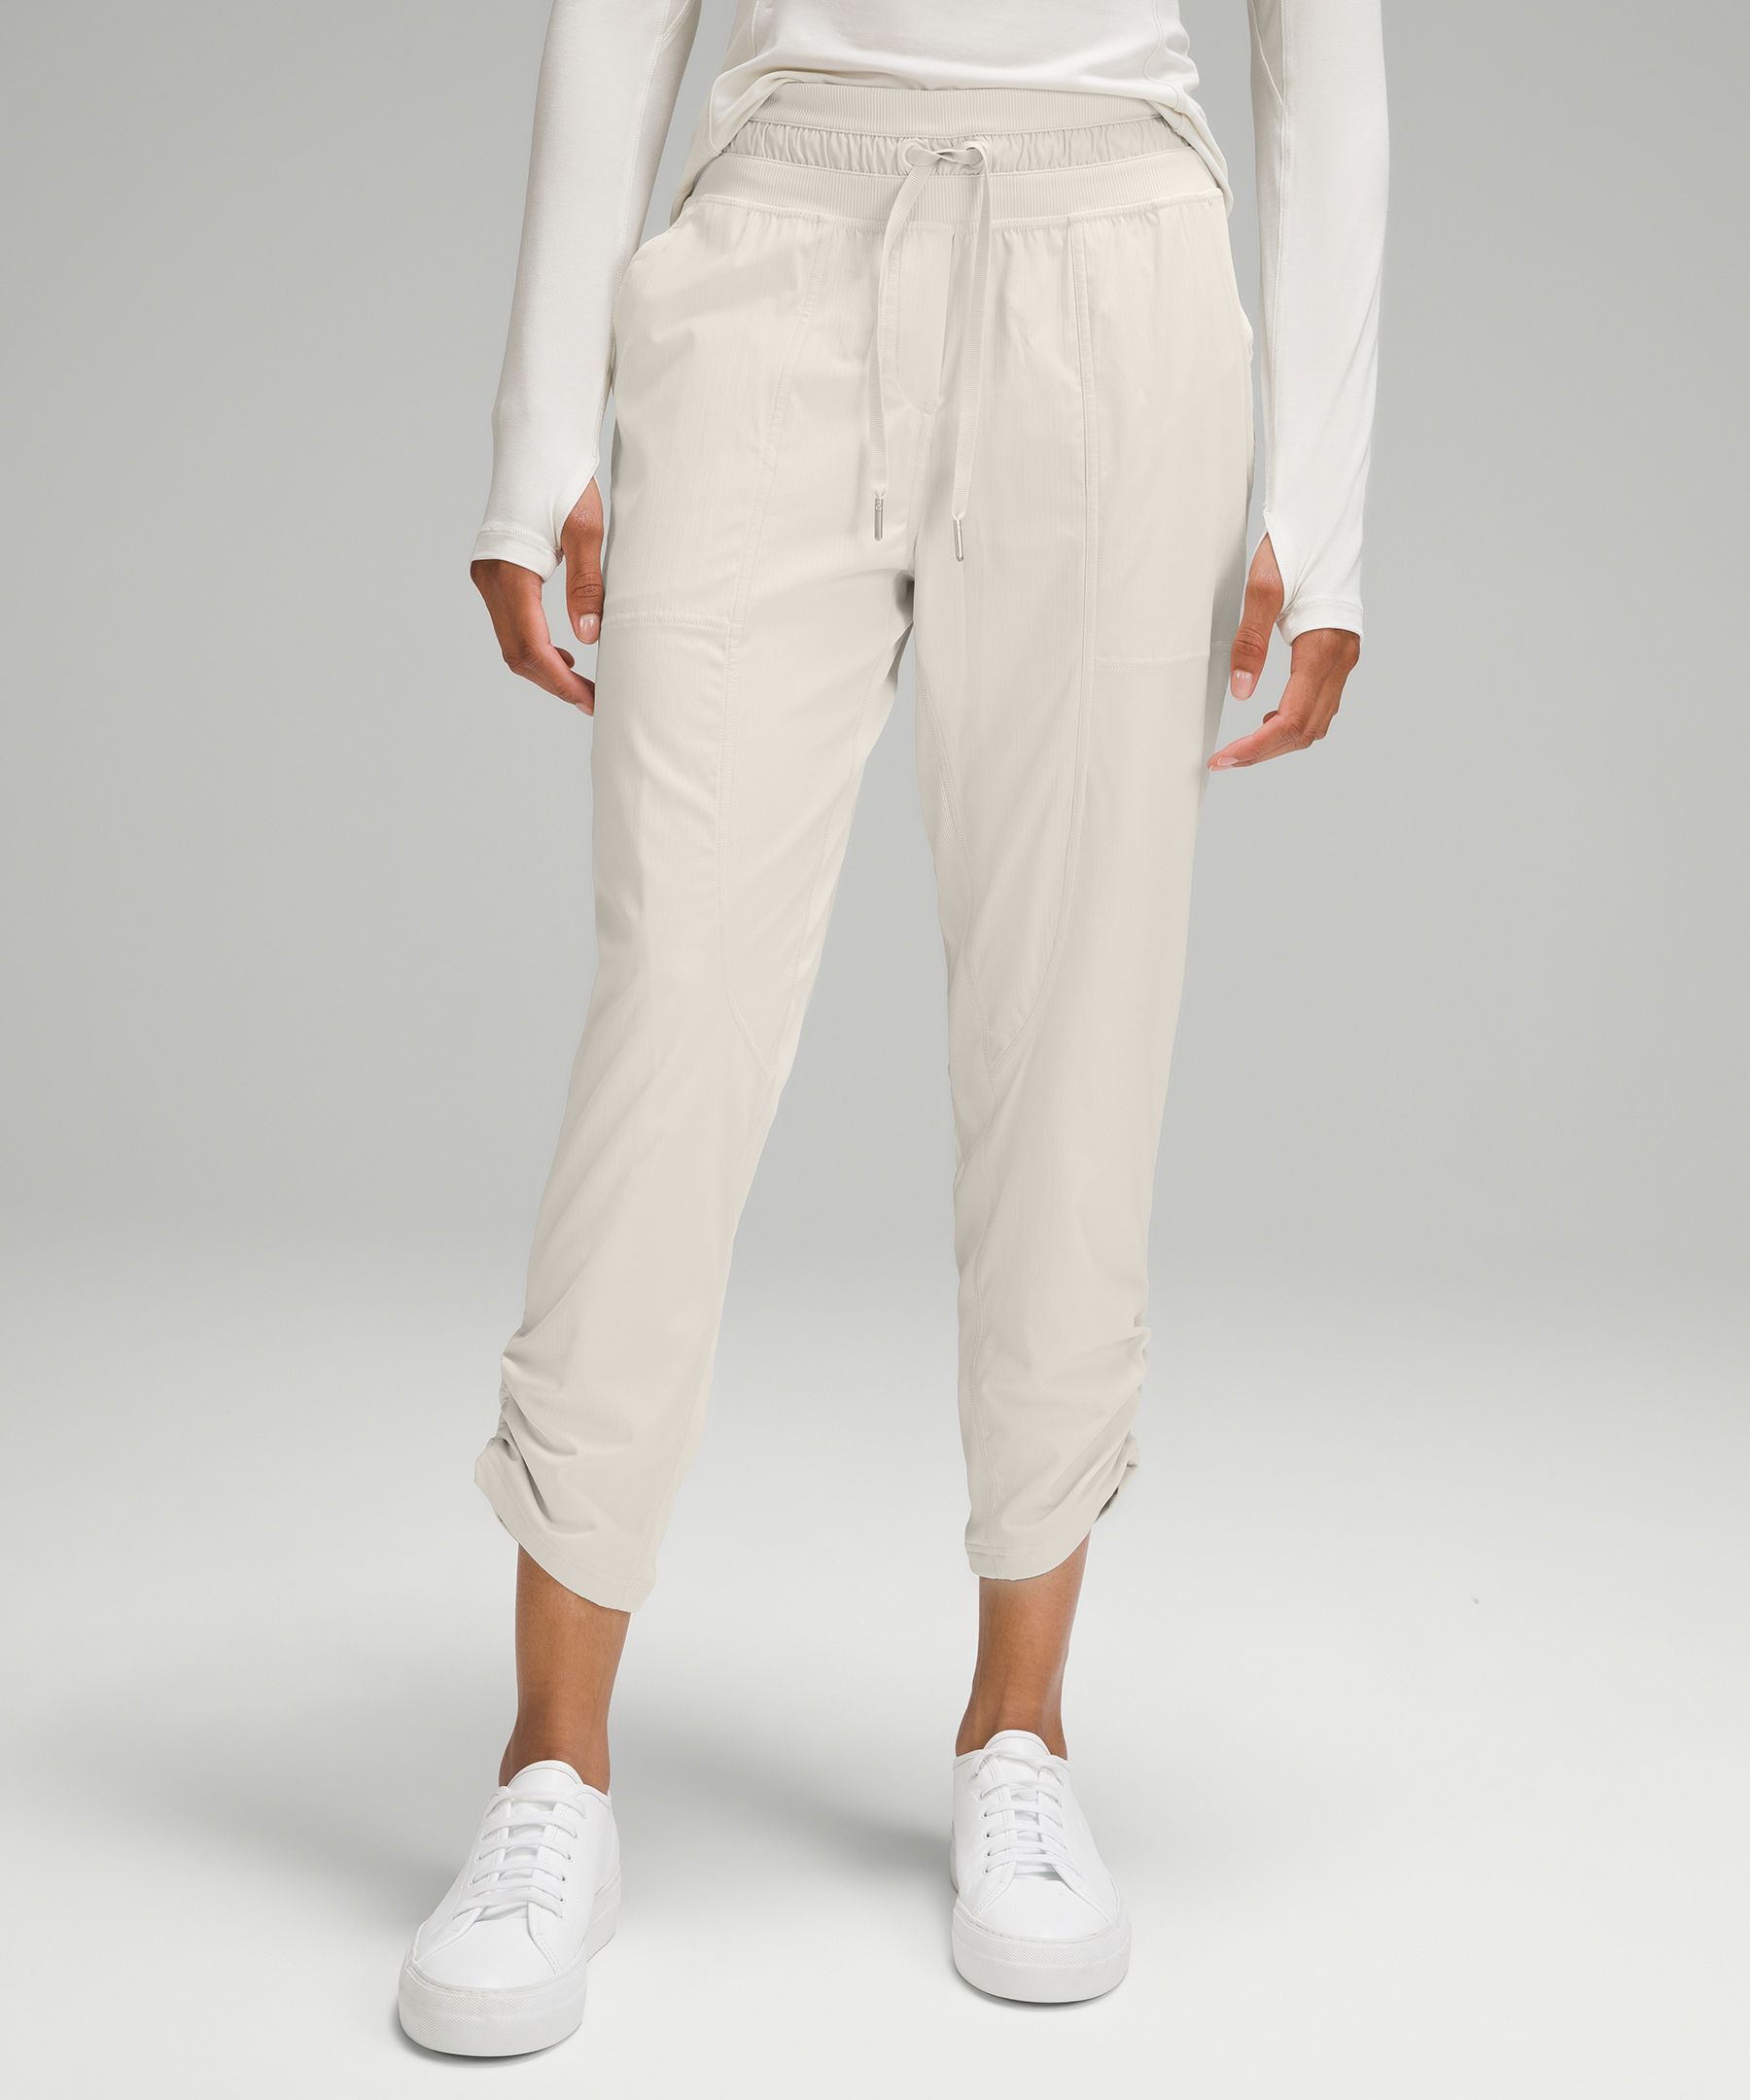 Dance Studio Mid-Rise Cropped Pant, Trousers